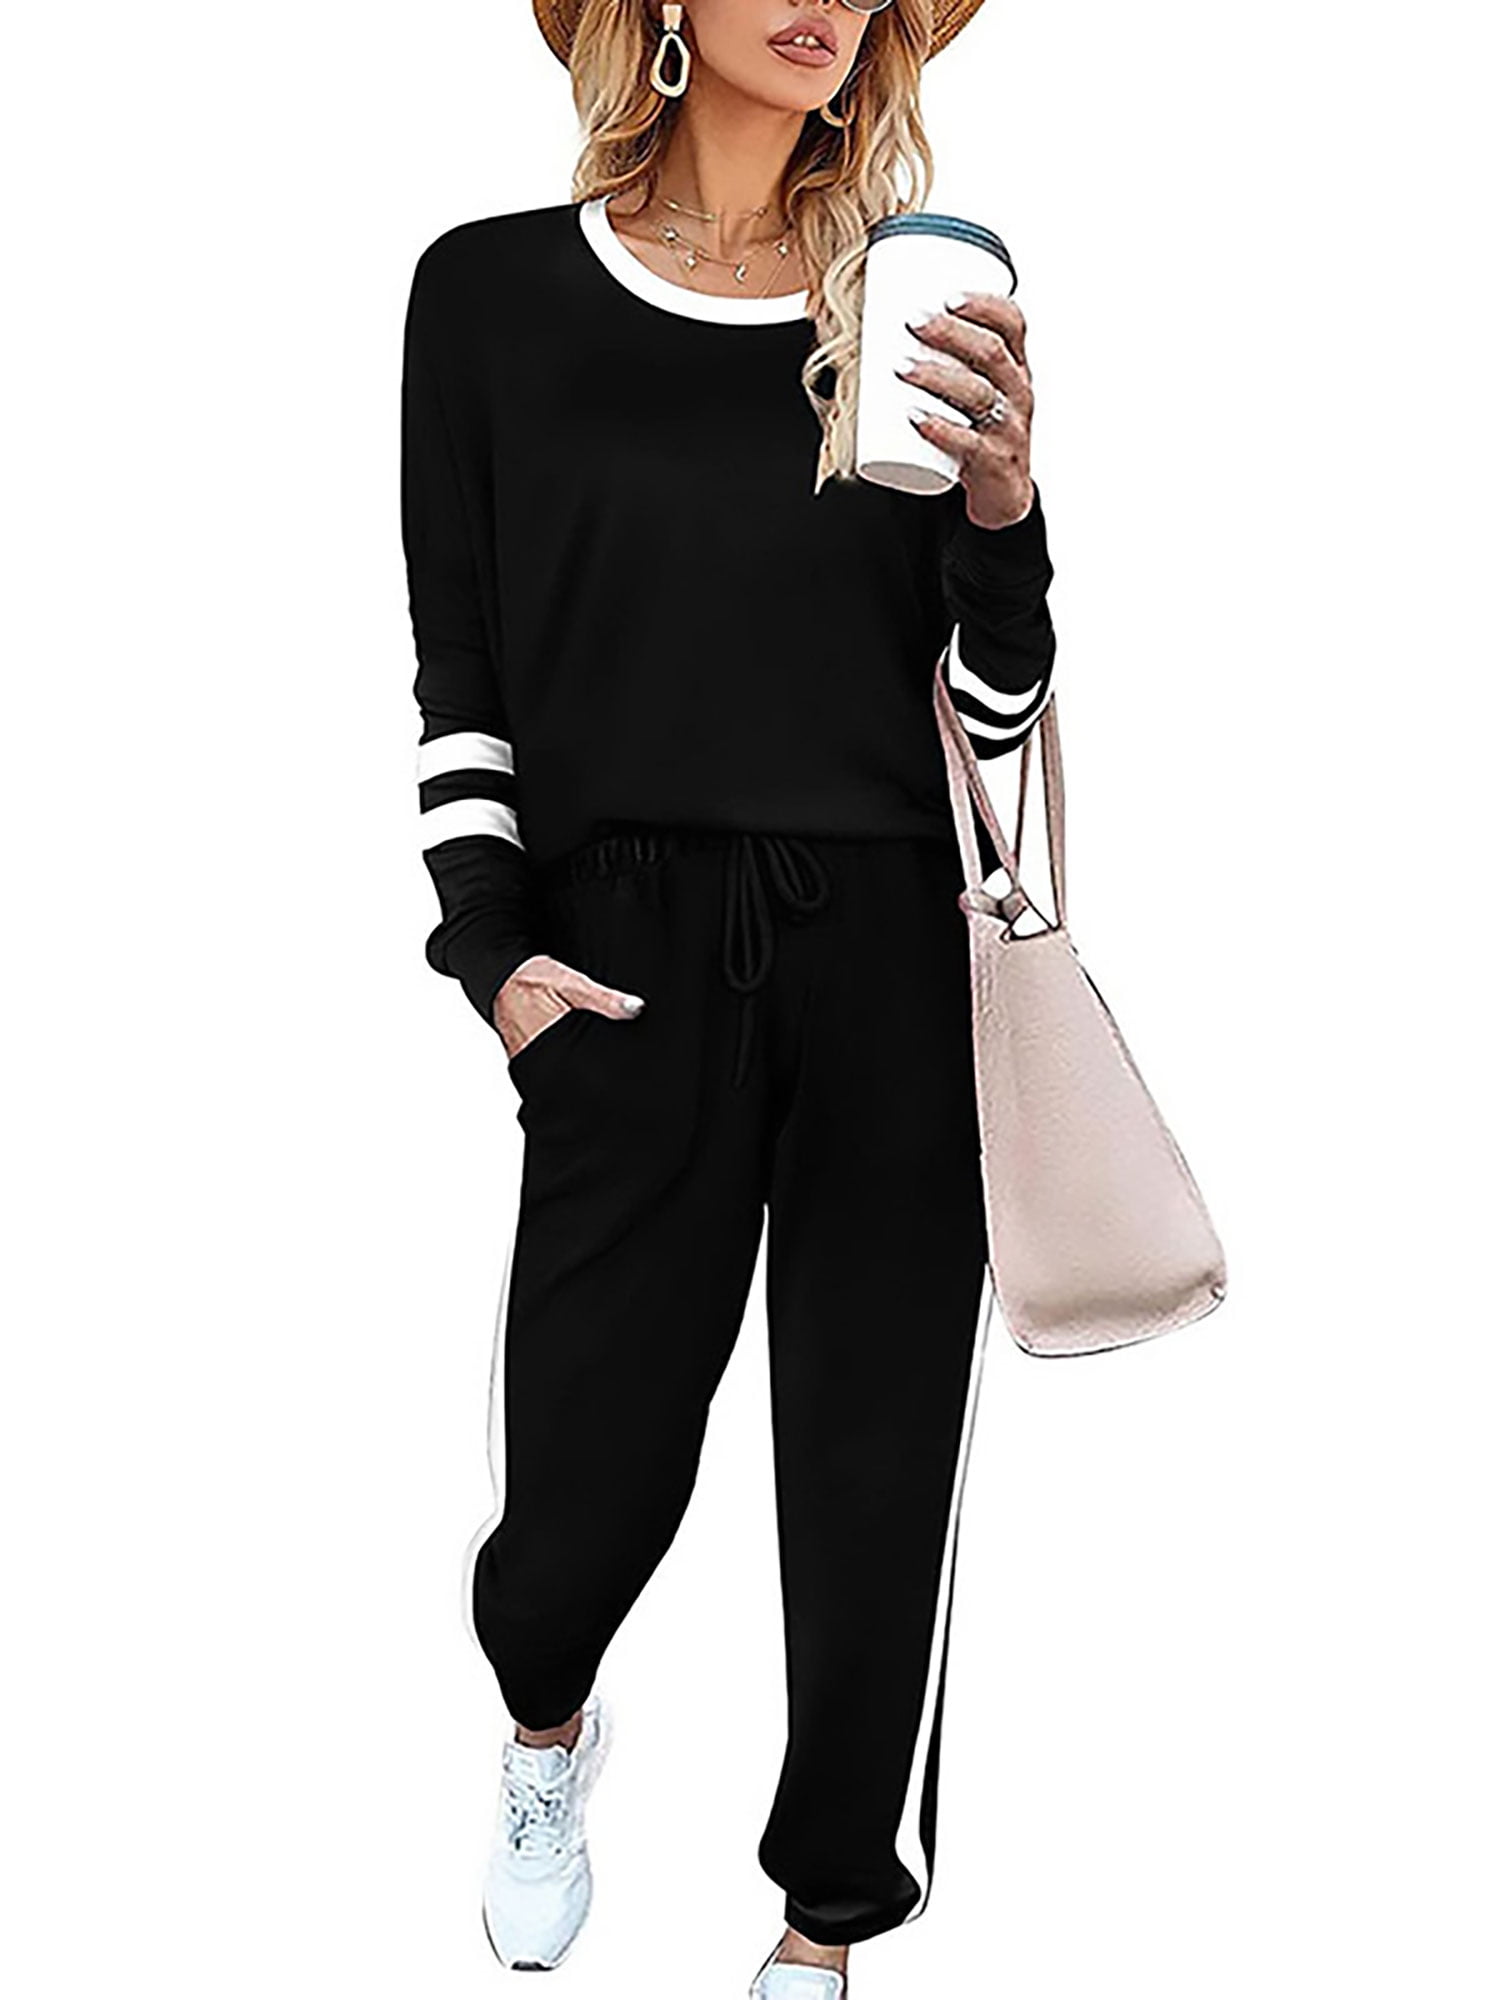 Sexy Dance Casual 2 Piece Outfits for Women Long Sleeve Sweatsuit ...